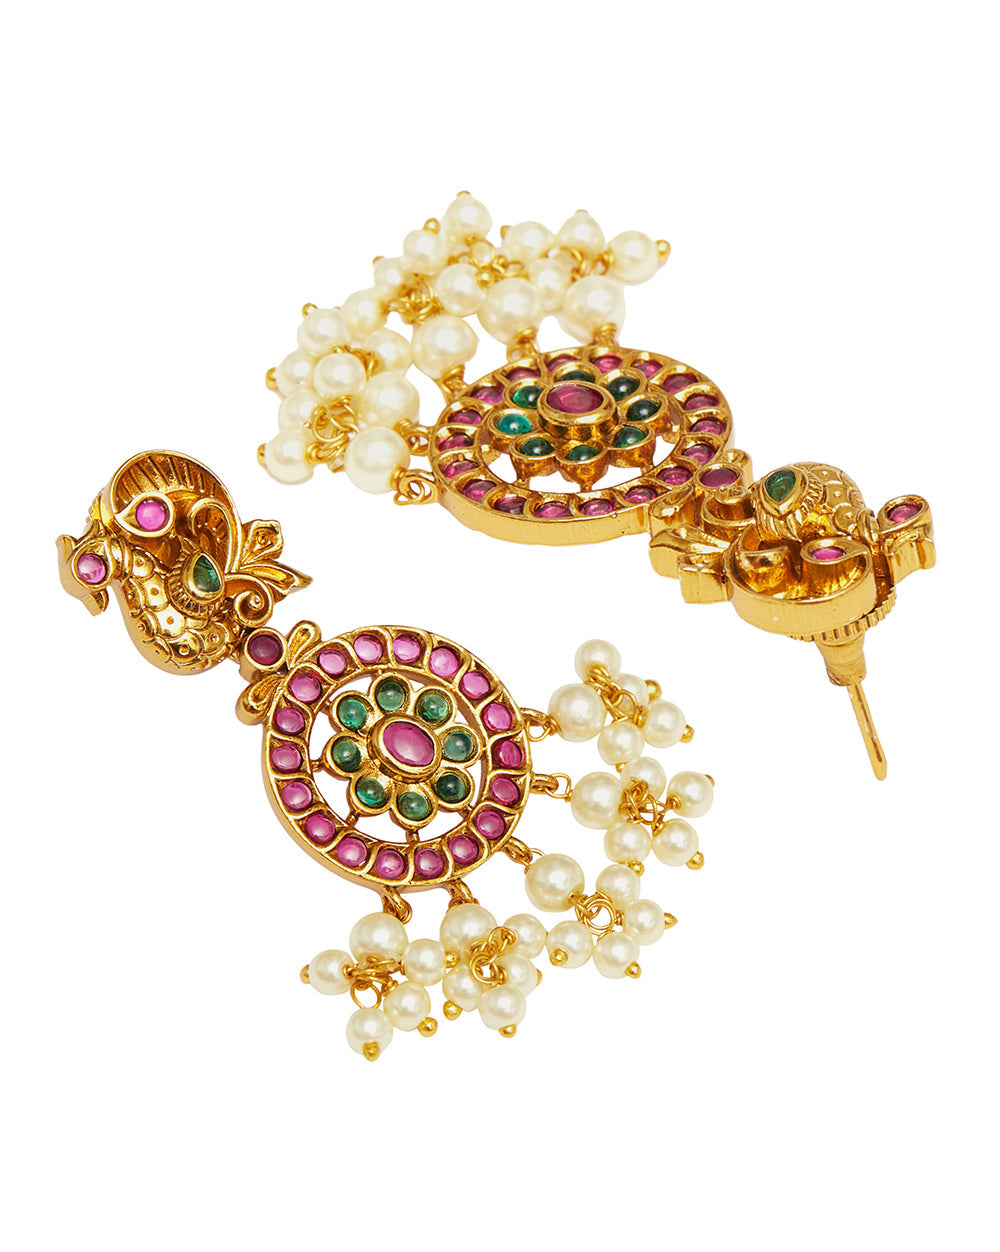 Women's Round Cut Gems And Faux Pearls Embellished Brass Ethnic Gold Toned Jewellery Set - Voylla